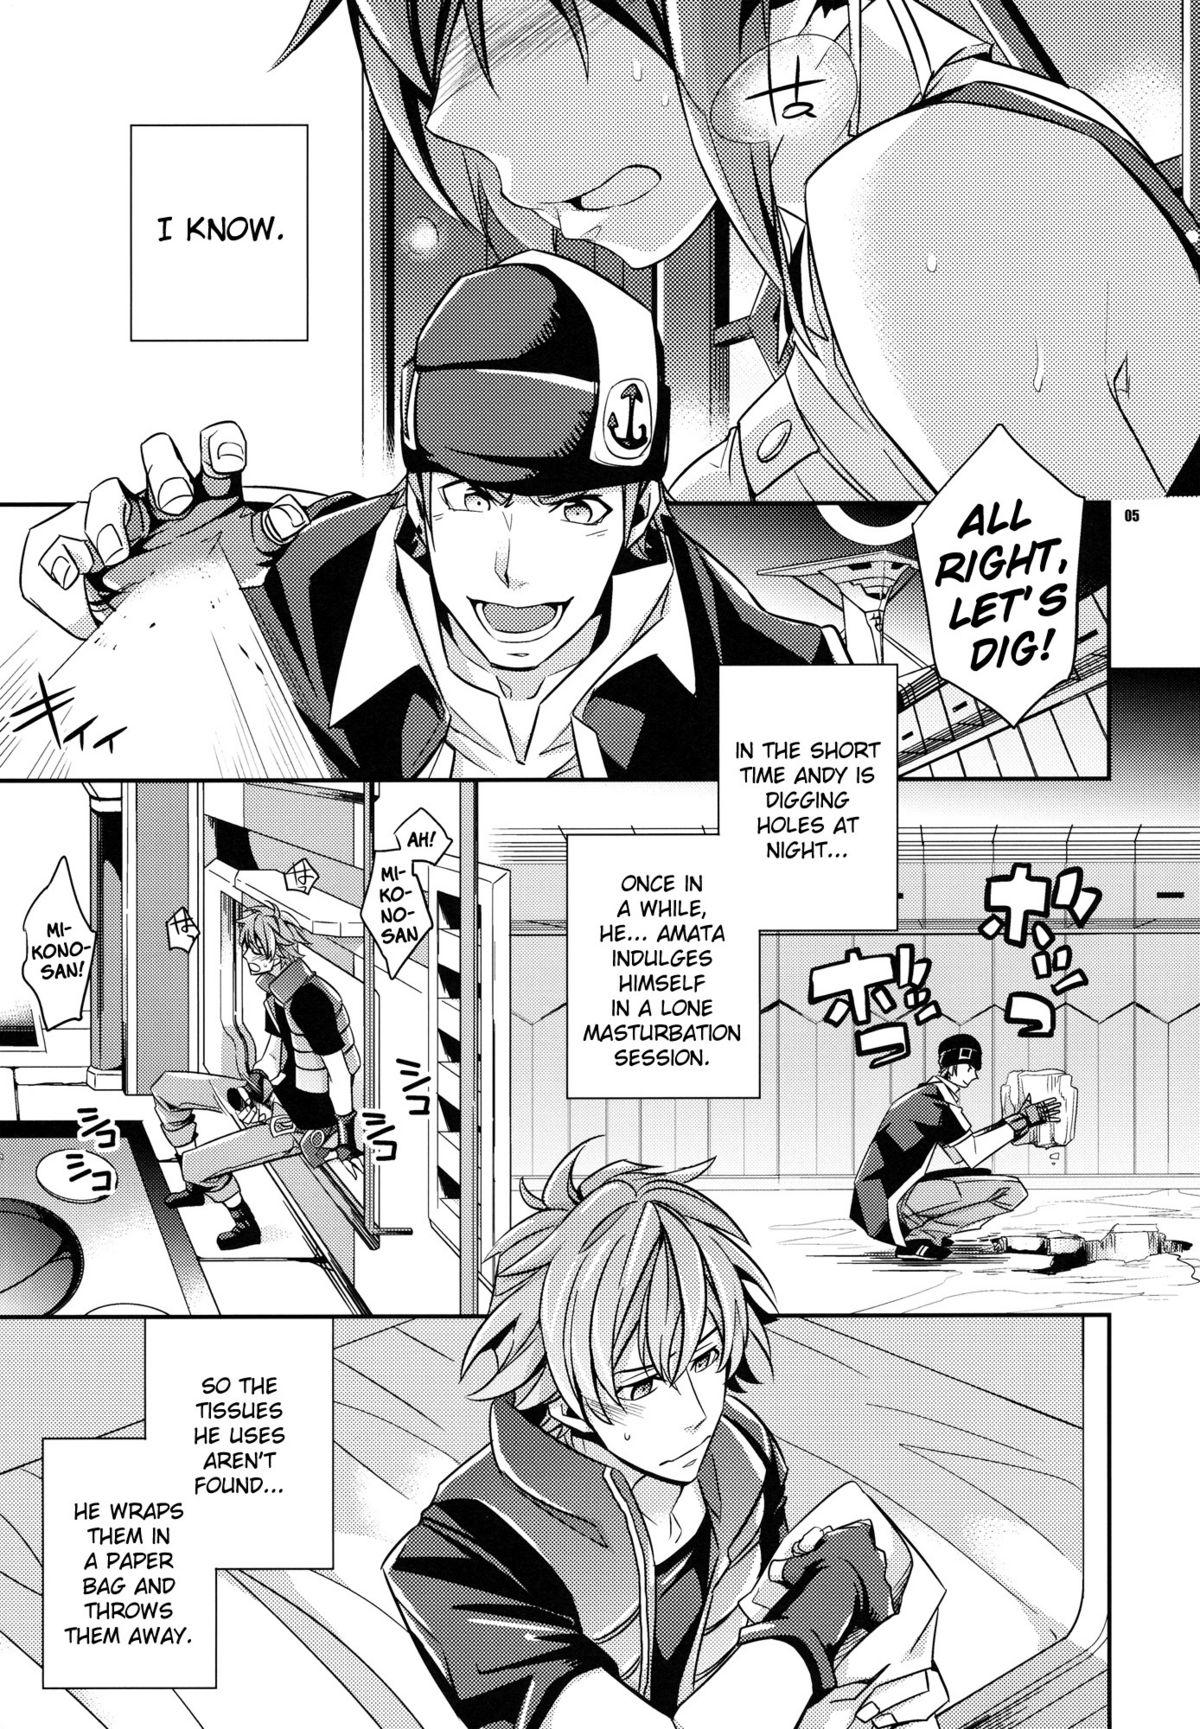 Vintage Zessica no Koufukuron | Zessica's Theory of Happiness - Aquarion evol Foursome - Page 3